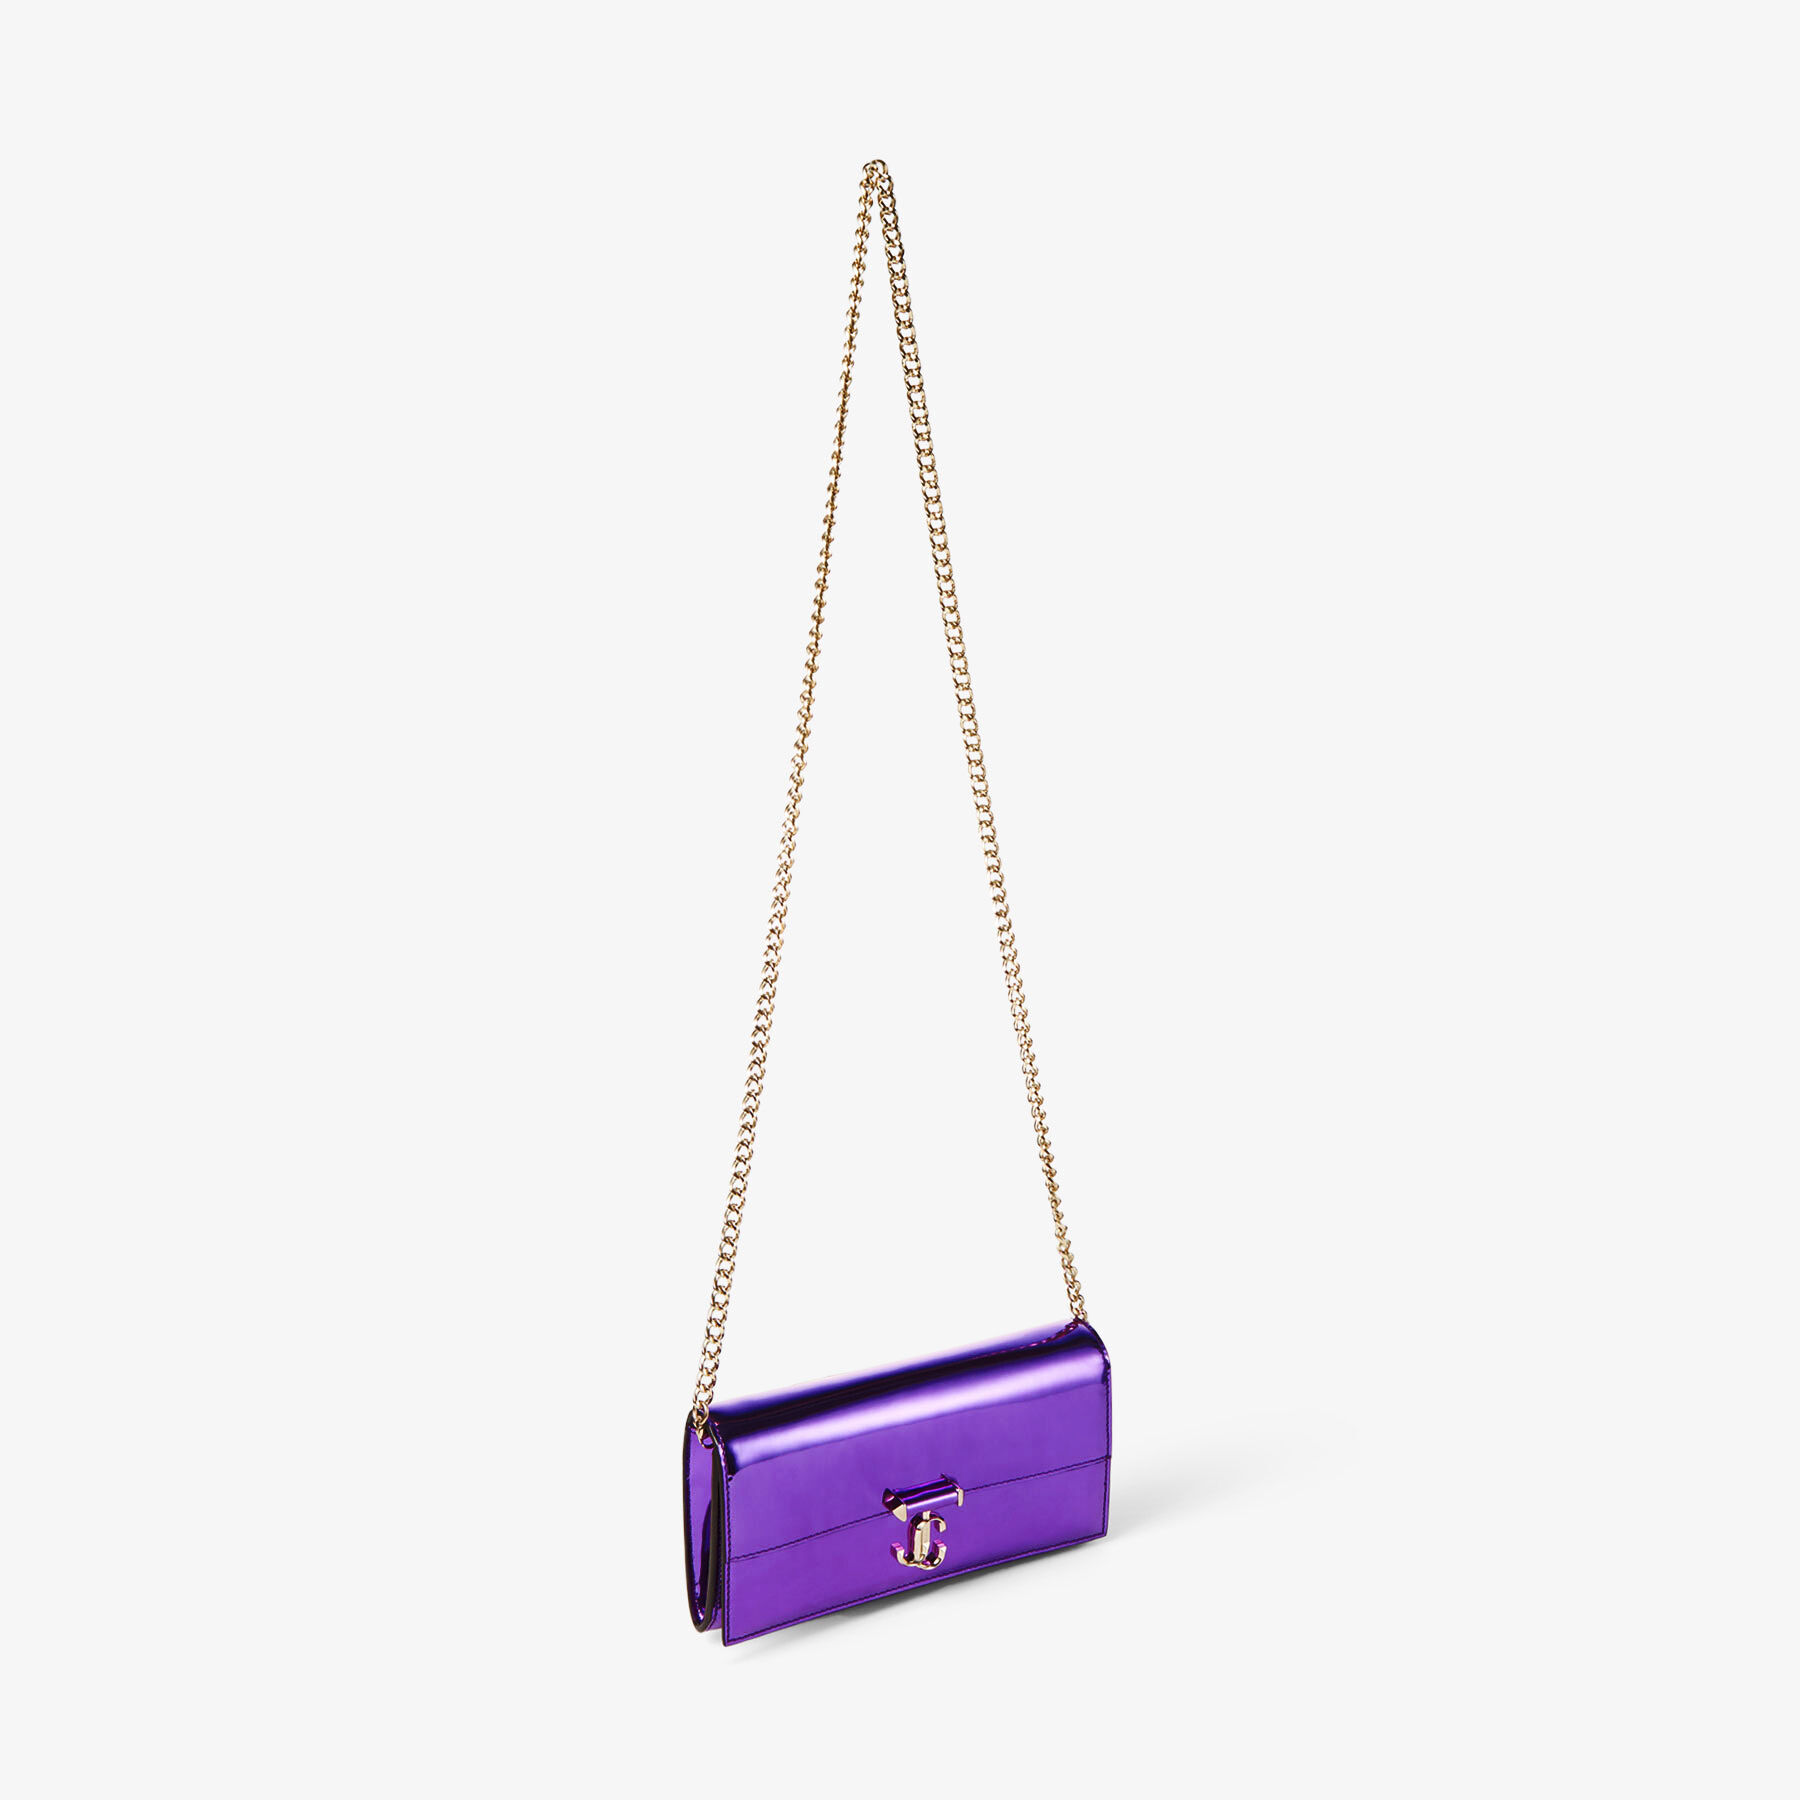 AVENUE WALLET/CHAIN | Cassis Liquid Metal Leather Wallet with Chain ...